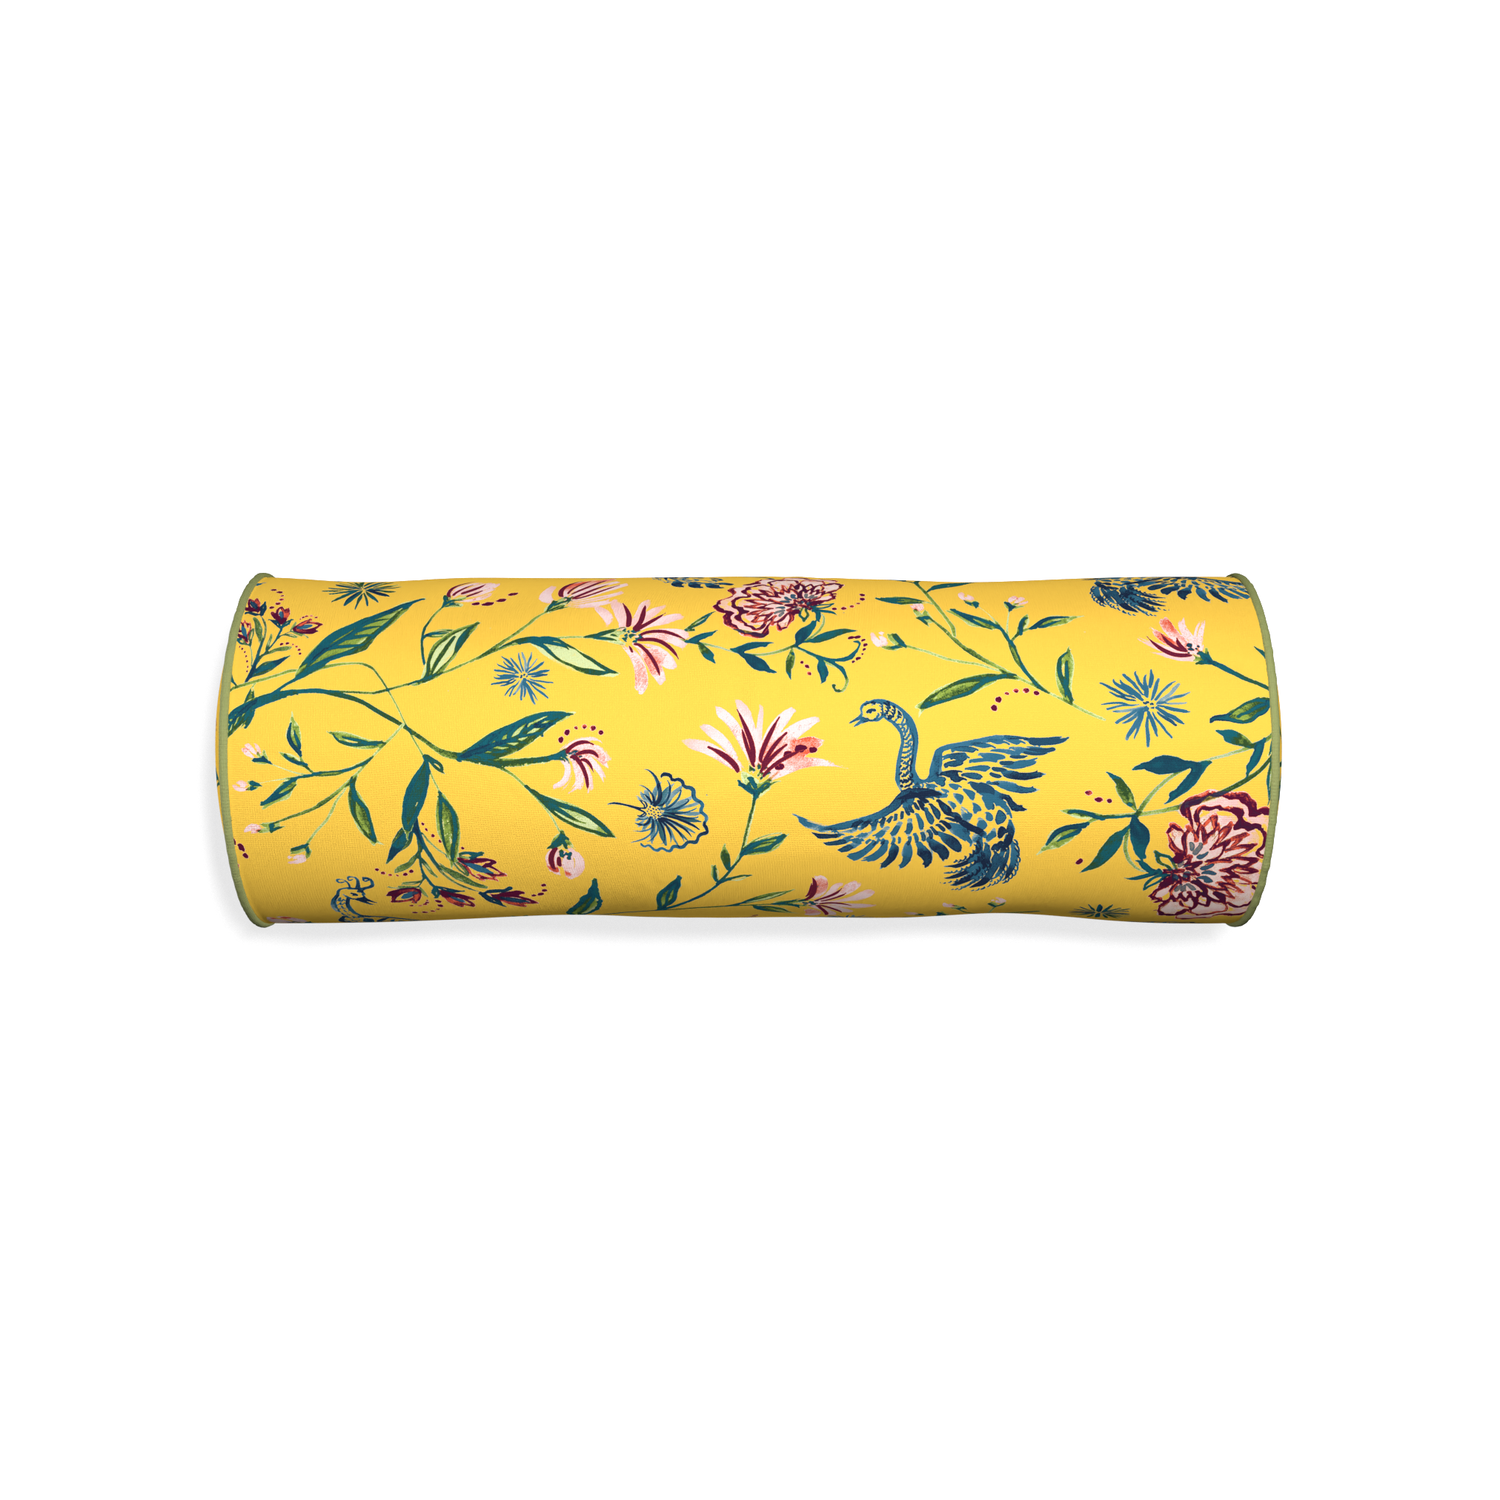 Bolster daphne canary custom yellow chinoiseriepillow with moss piping on white background